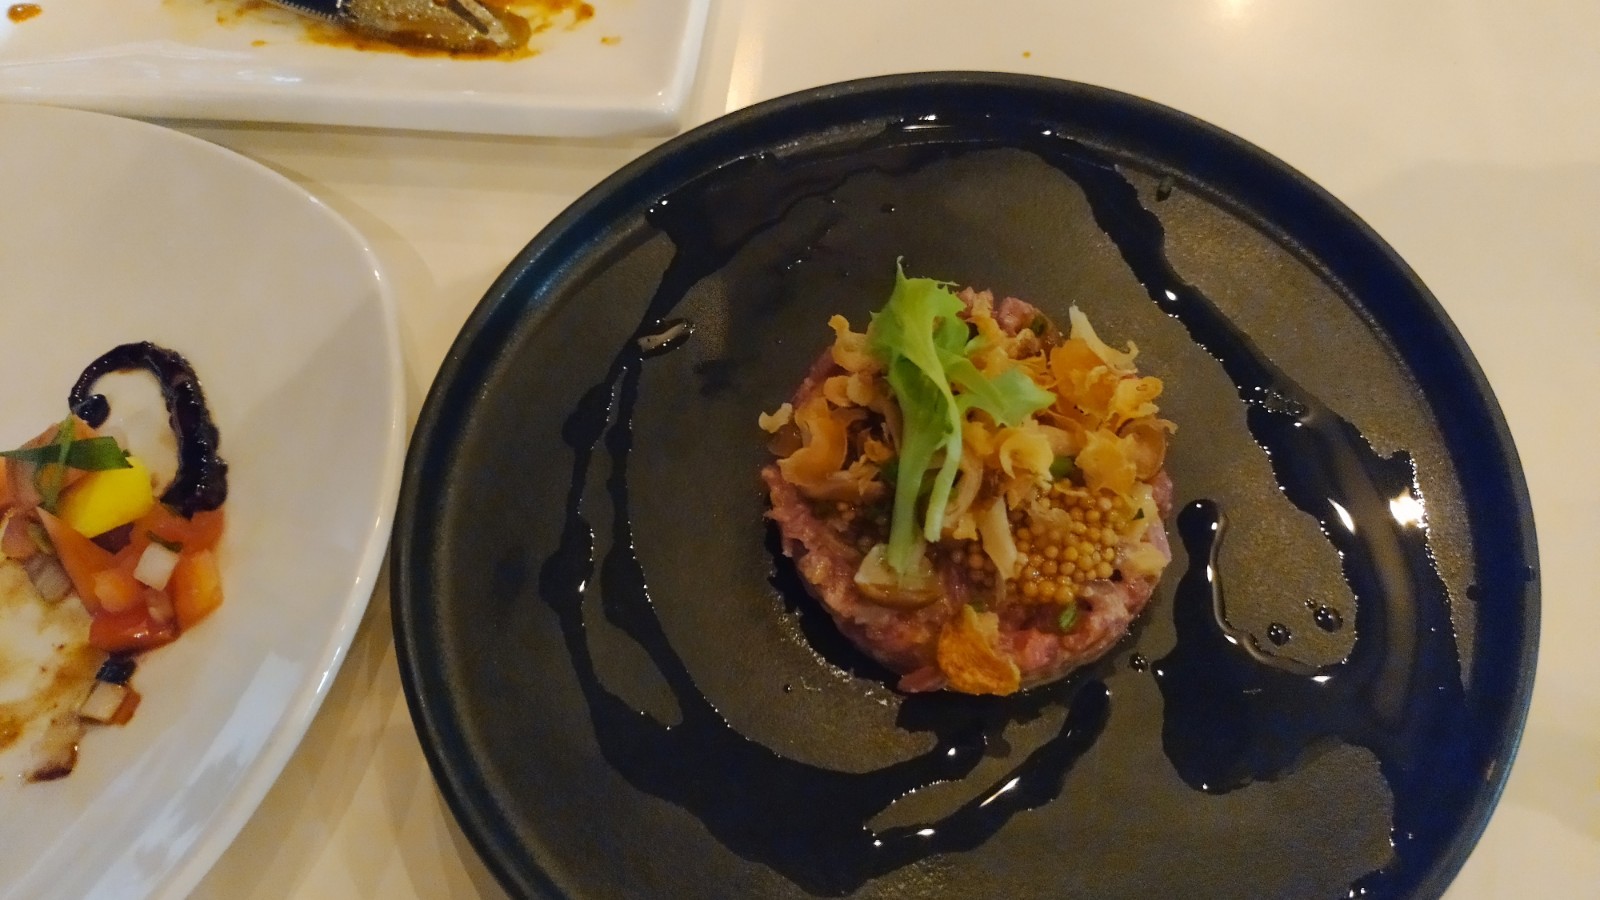 Second picture of the octopus dish.